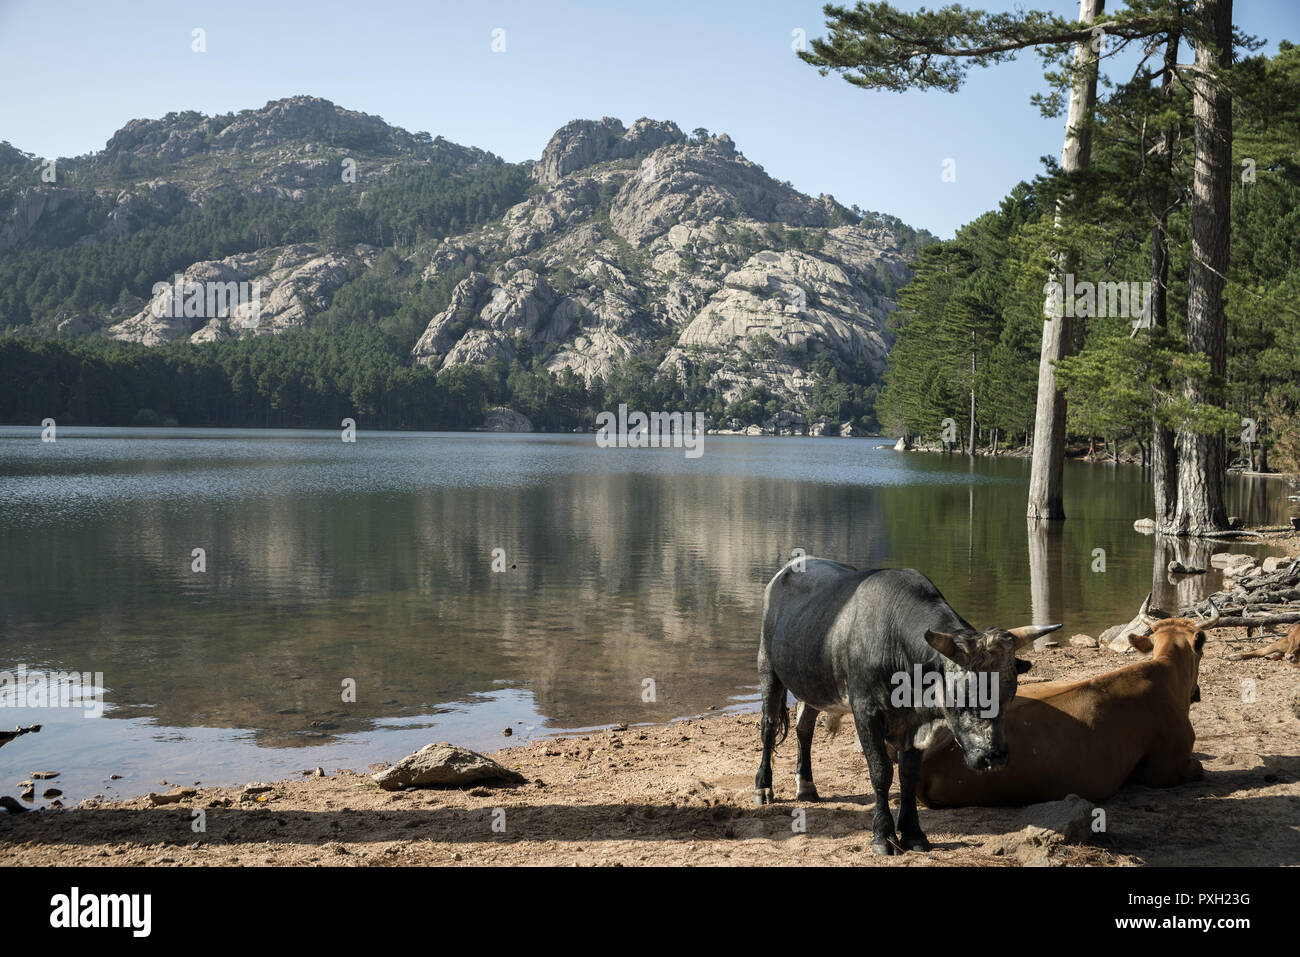 Reflected in the water of the mountains surrounding the Lac de L'Ospédale. Spiegelt sich im Wasser der Berge. Cows at the lake. Kühe am See. Stock Photo